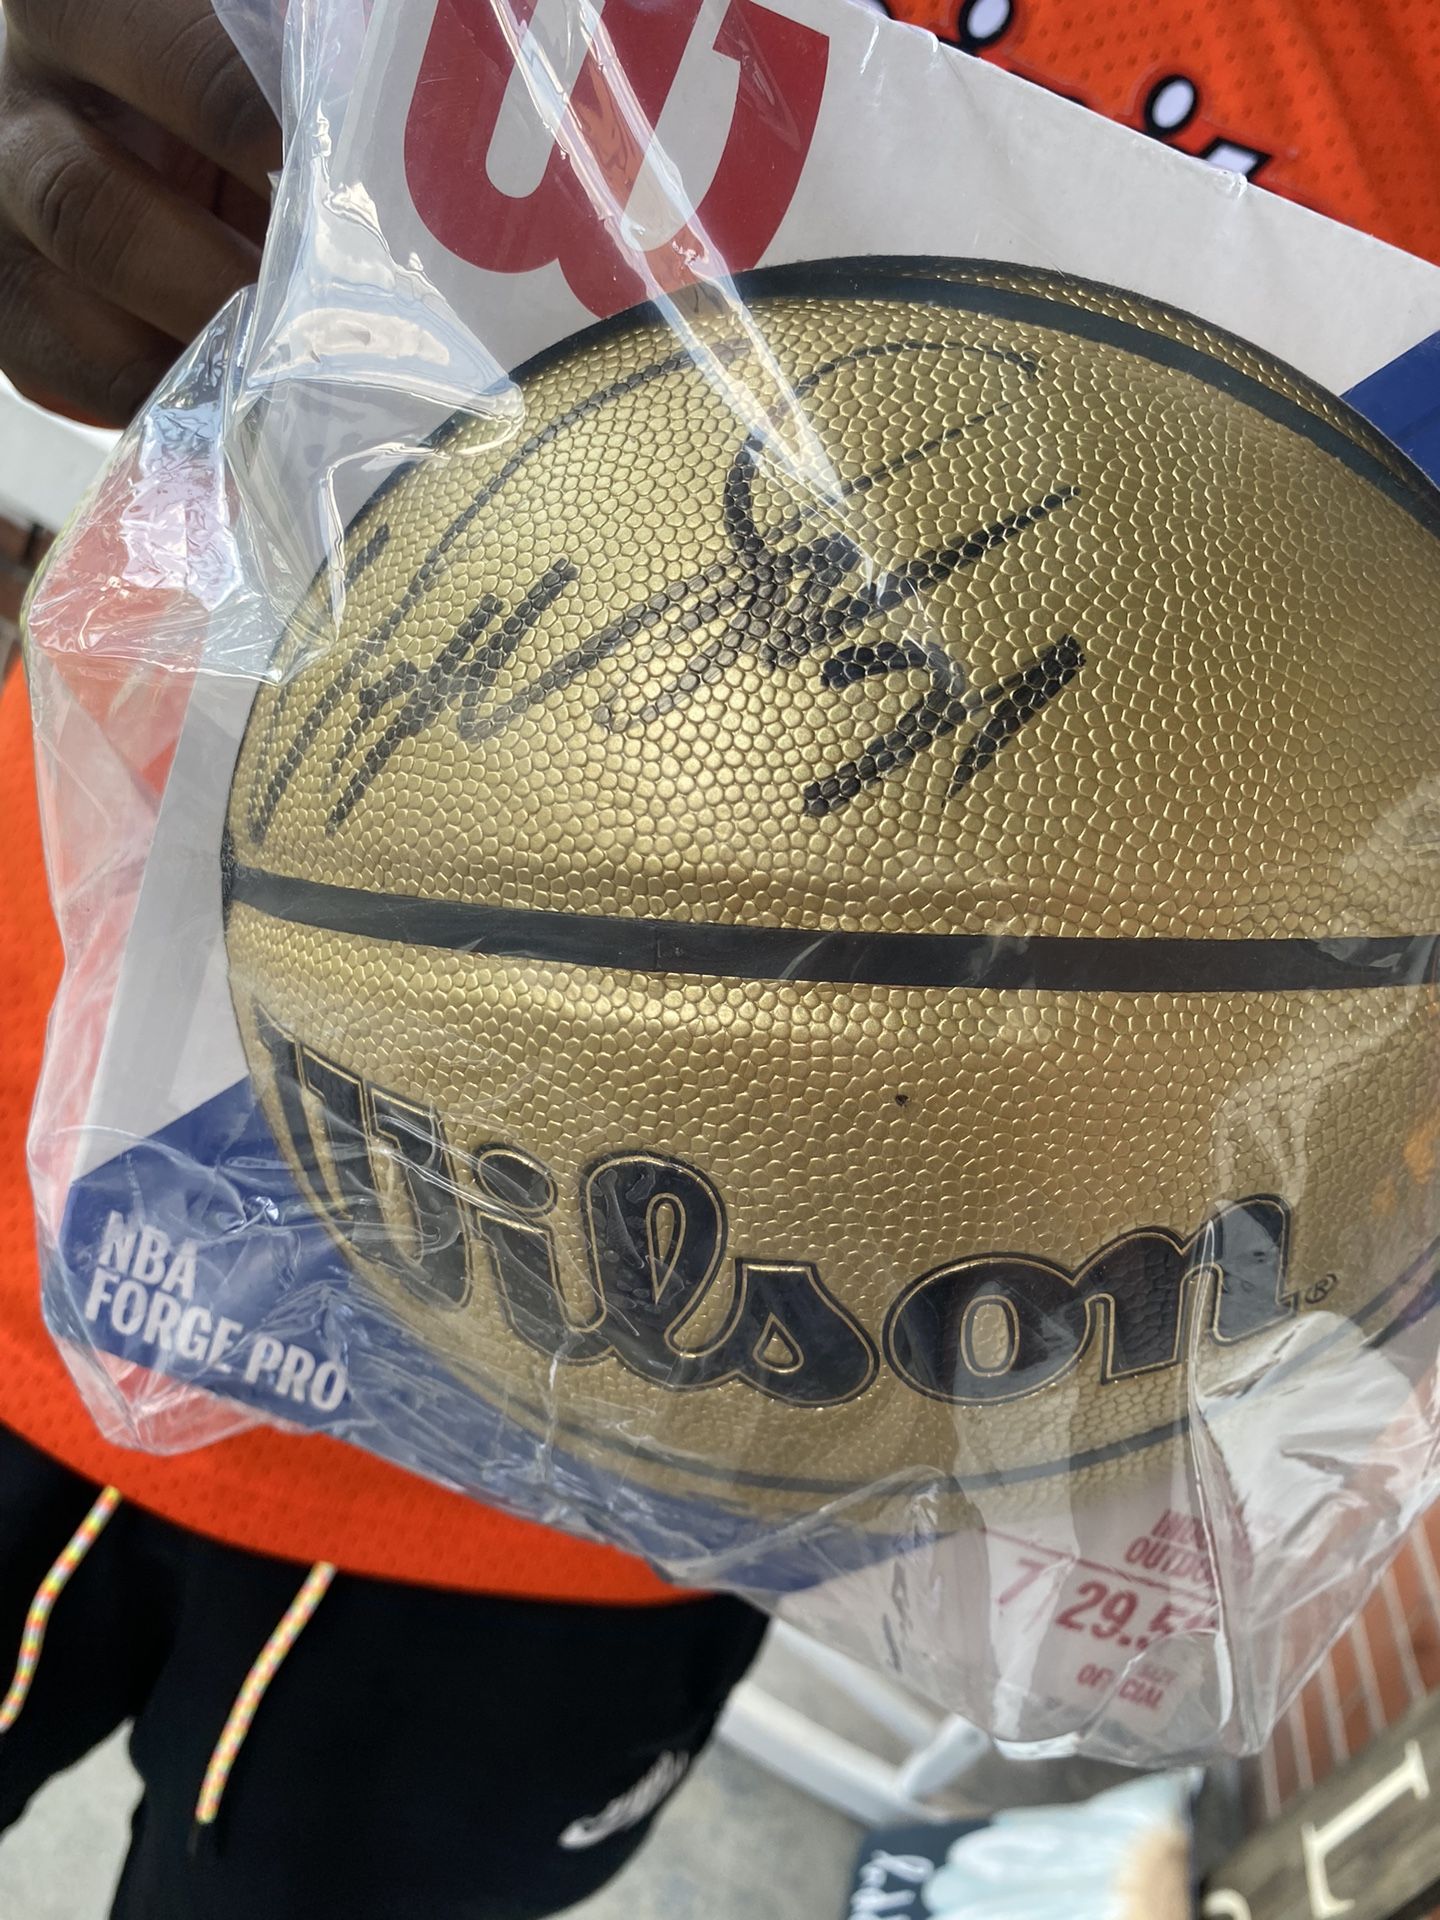 Dominique Wilkens Signed Basketball